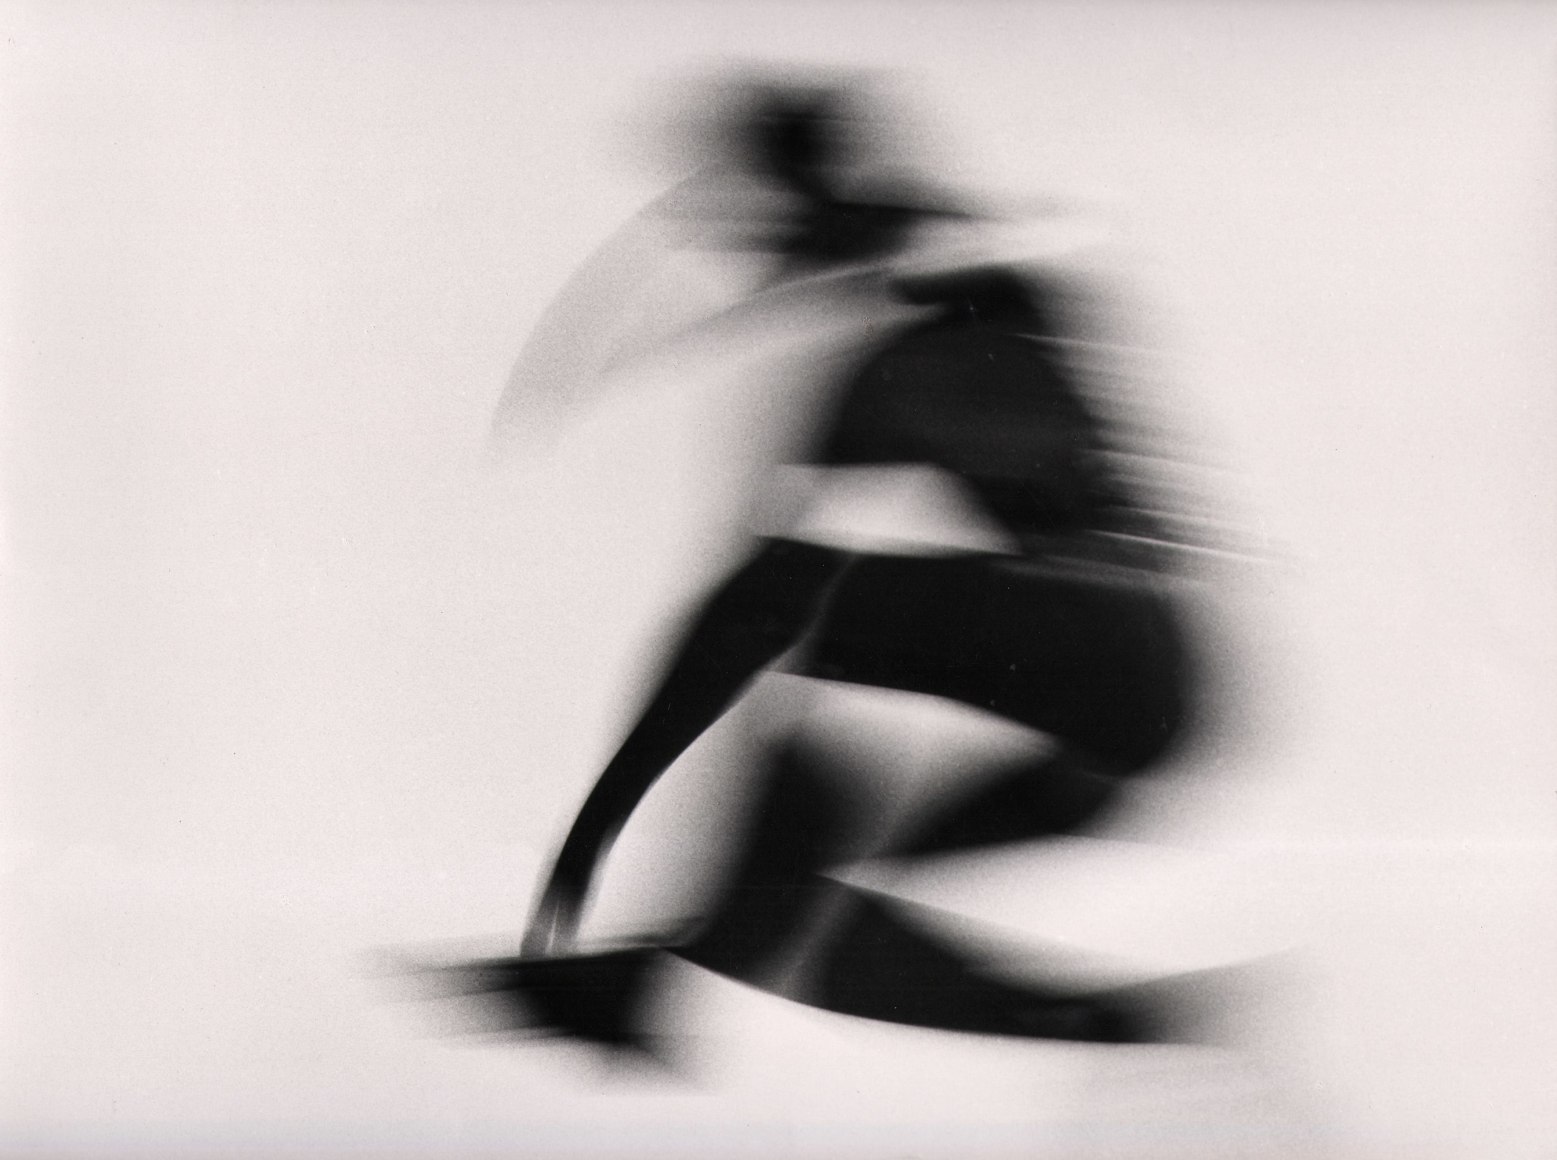 Stanislao Farri, Reggio Emilia, ​1959. Abstract silhouette of a humanoid figure blurred with motion against a white background.